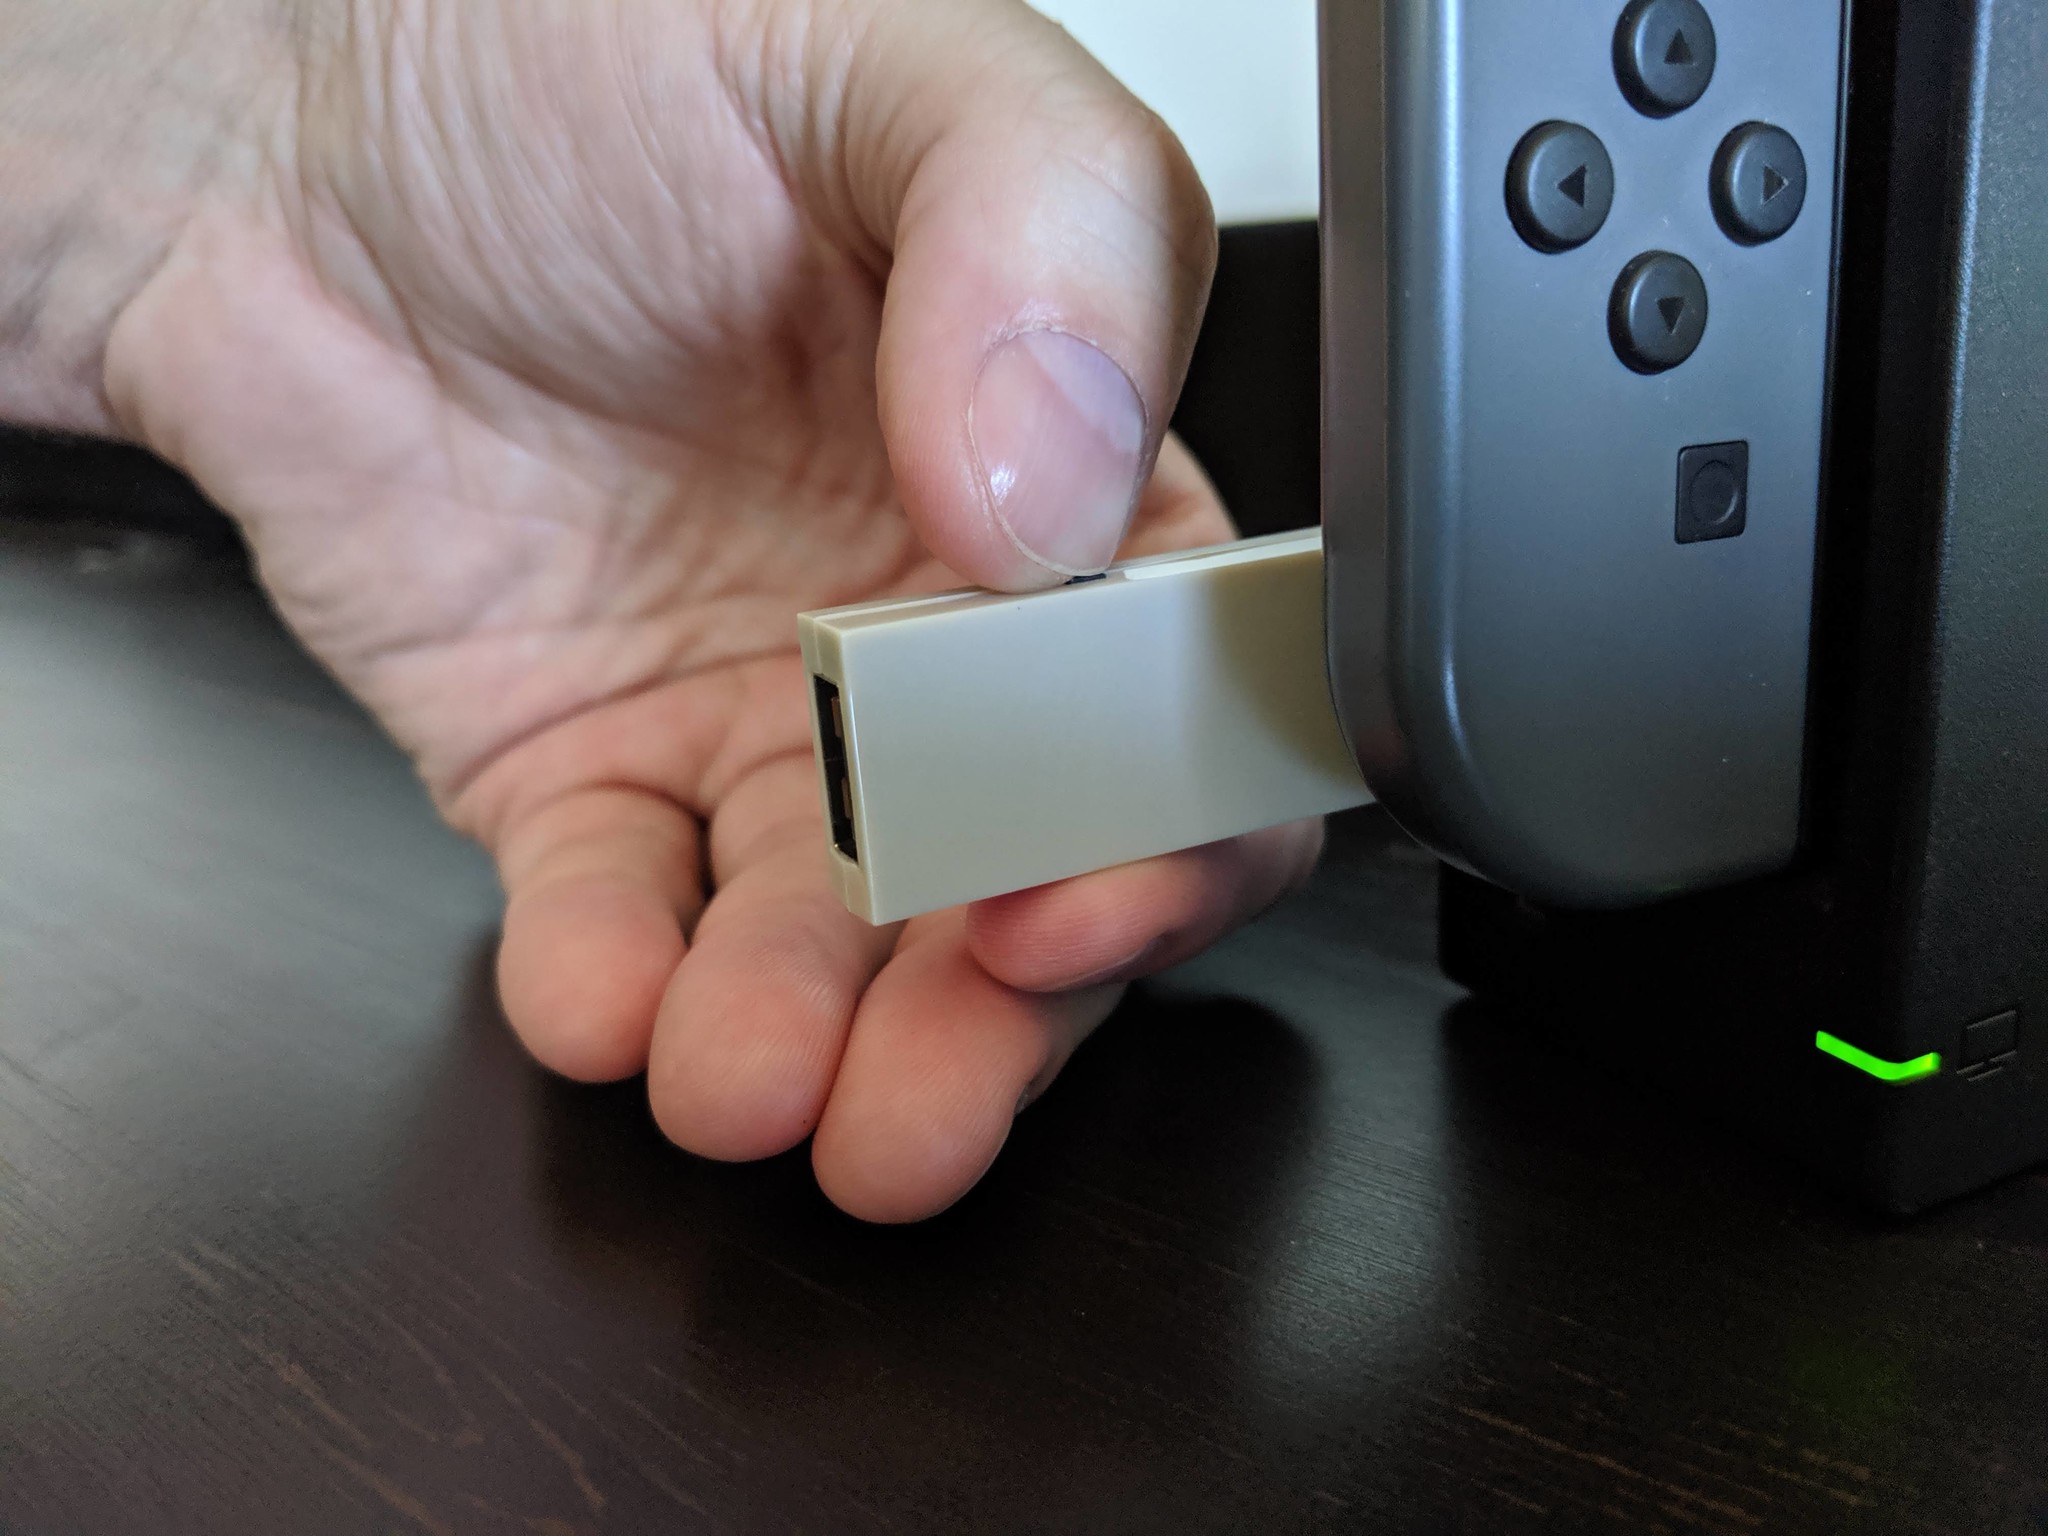 How to connect your Xbox One controller with the Nintendo Switch in wireless docked mode step two: hold down the small black button on the adapter for 3-5 seconds until it changes modes